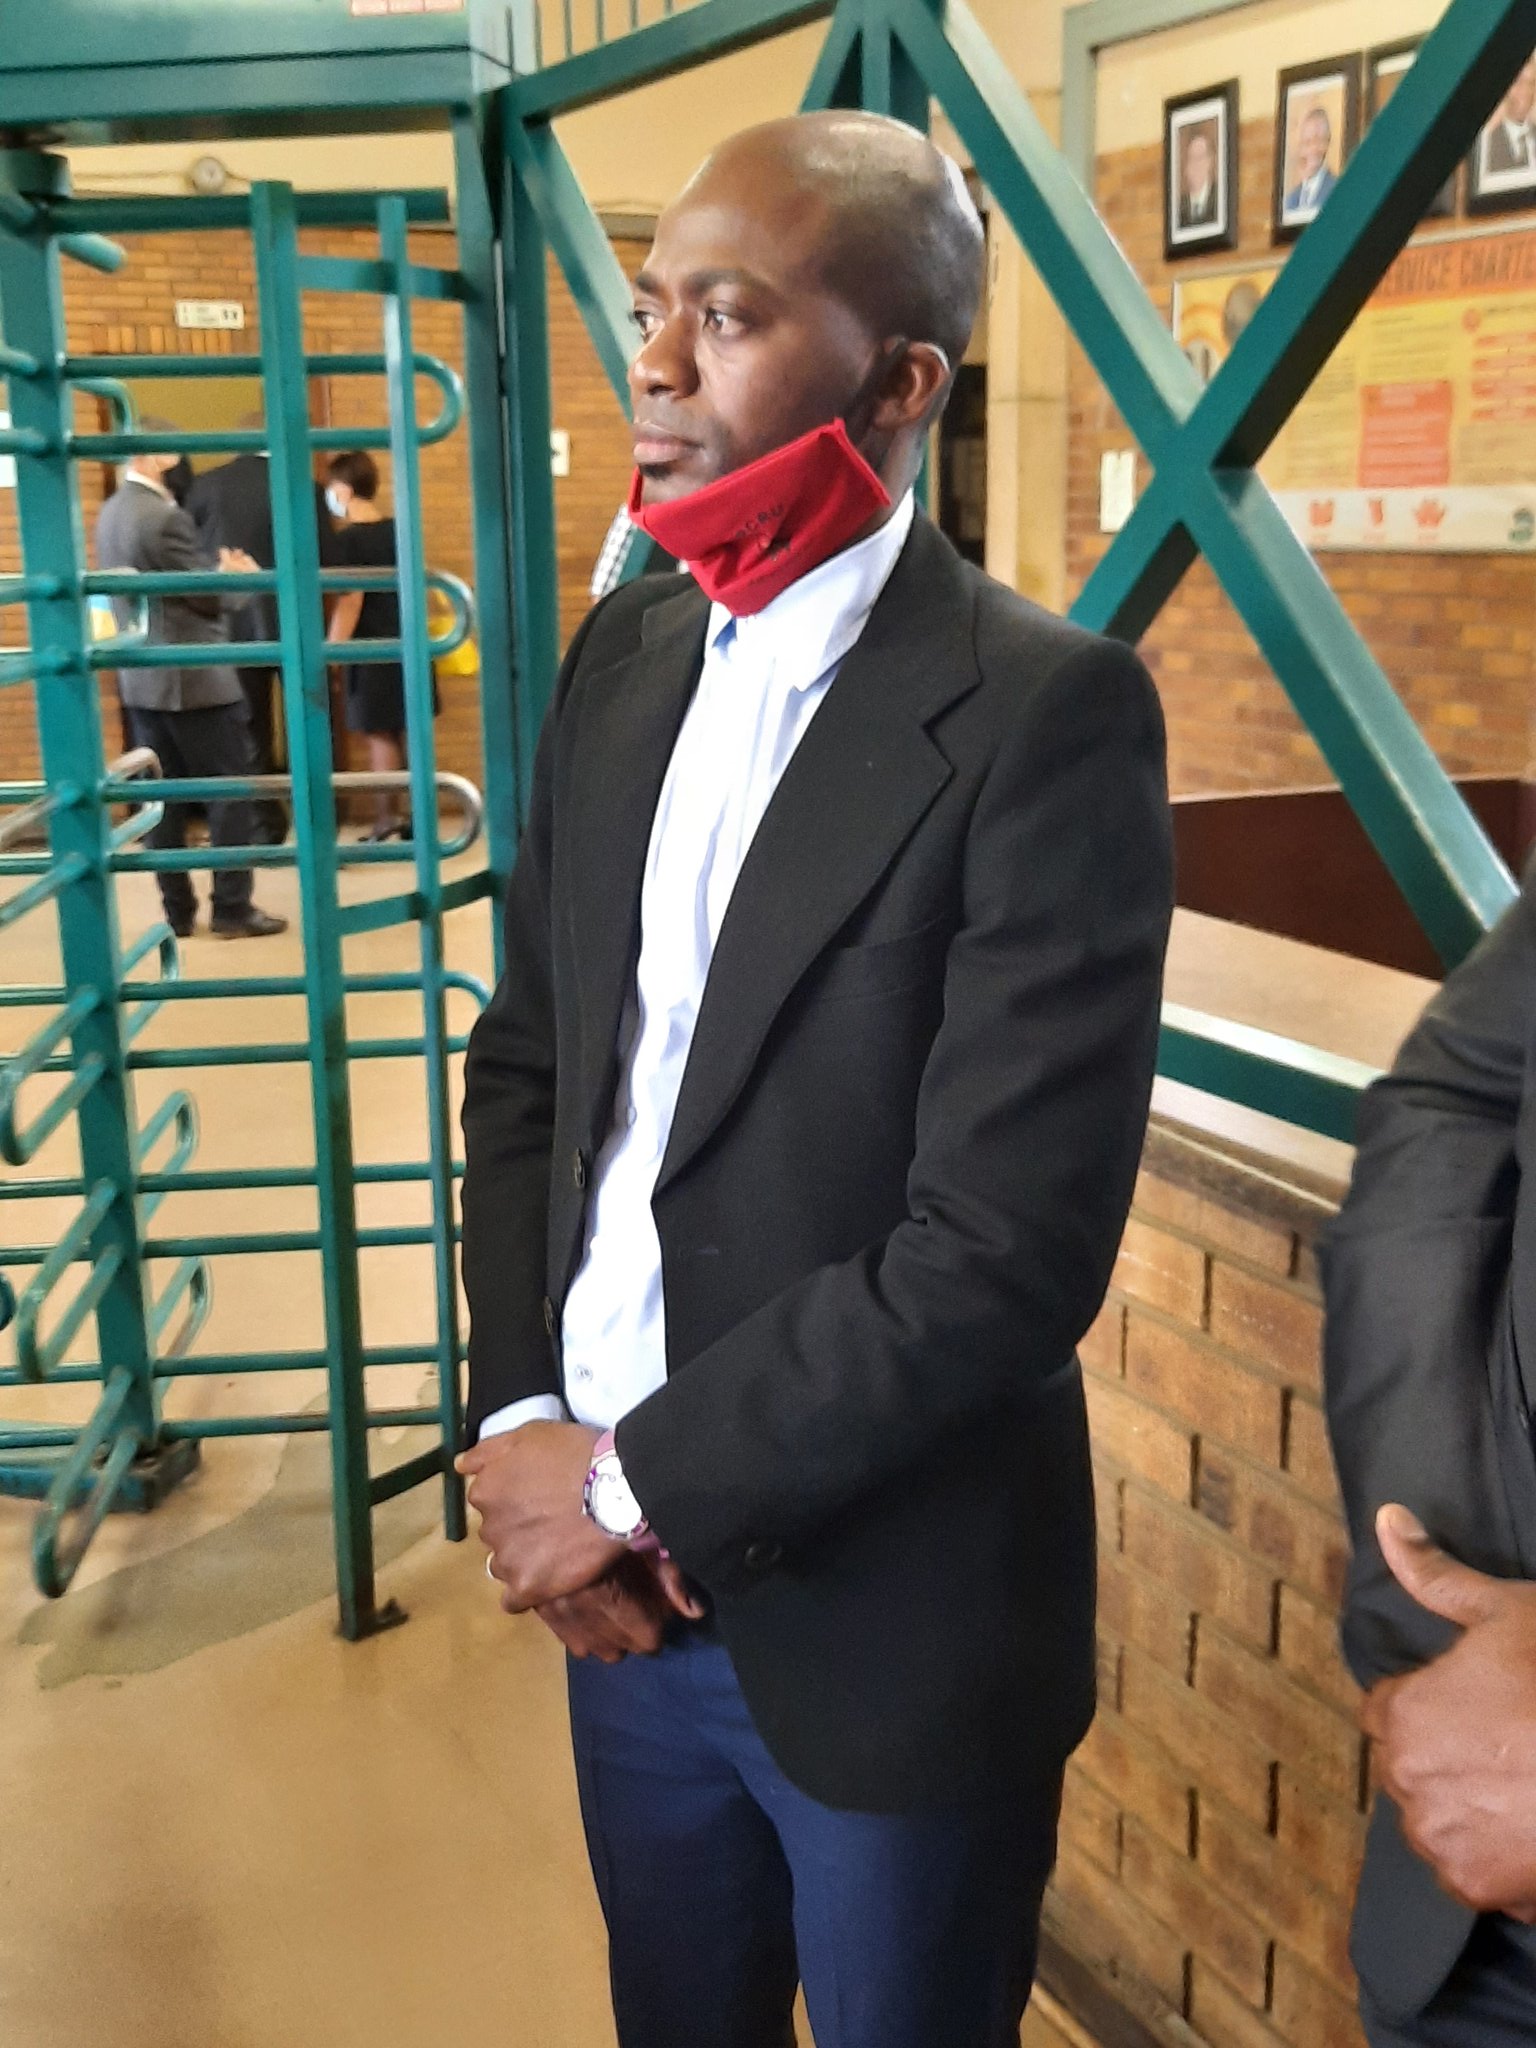  Video |Senzo Meyiwa’s brother allegedly threatened over new ‘discovery’